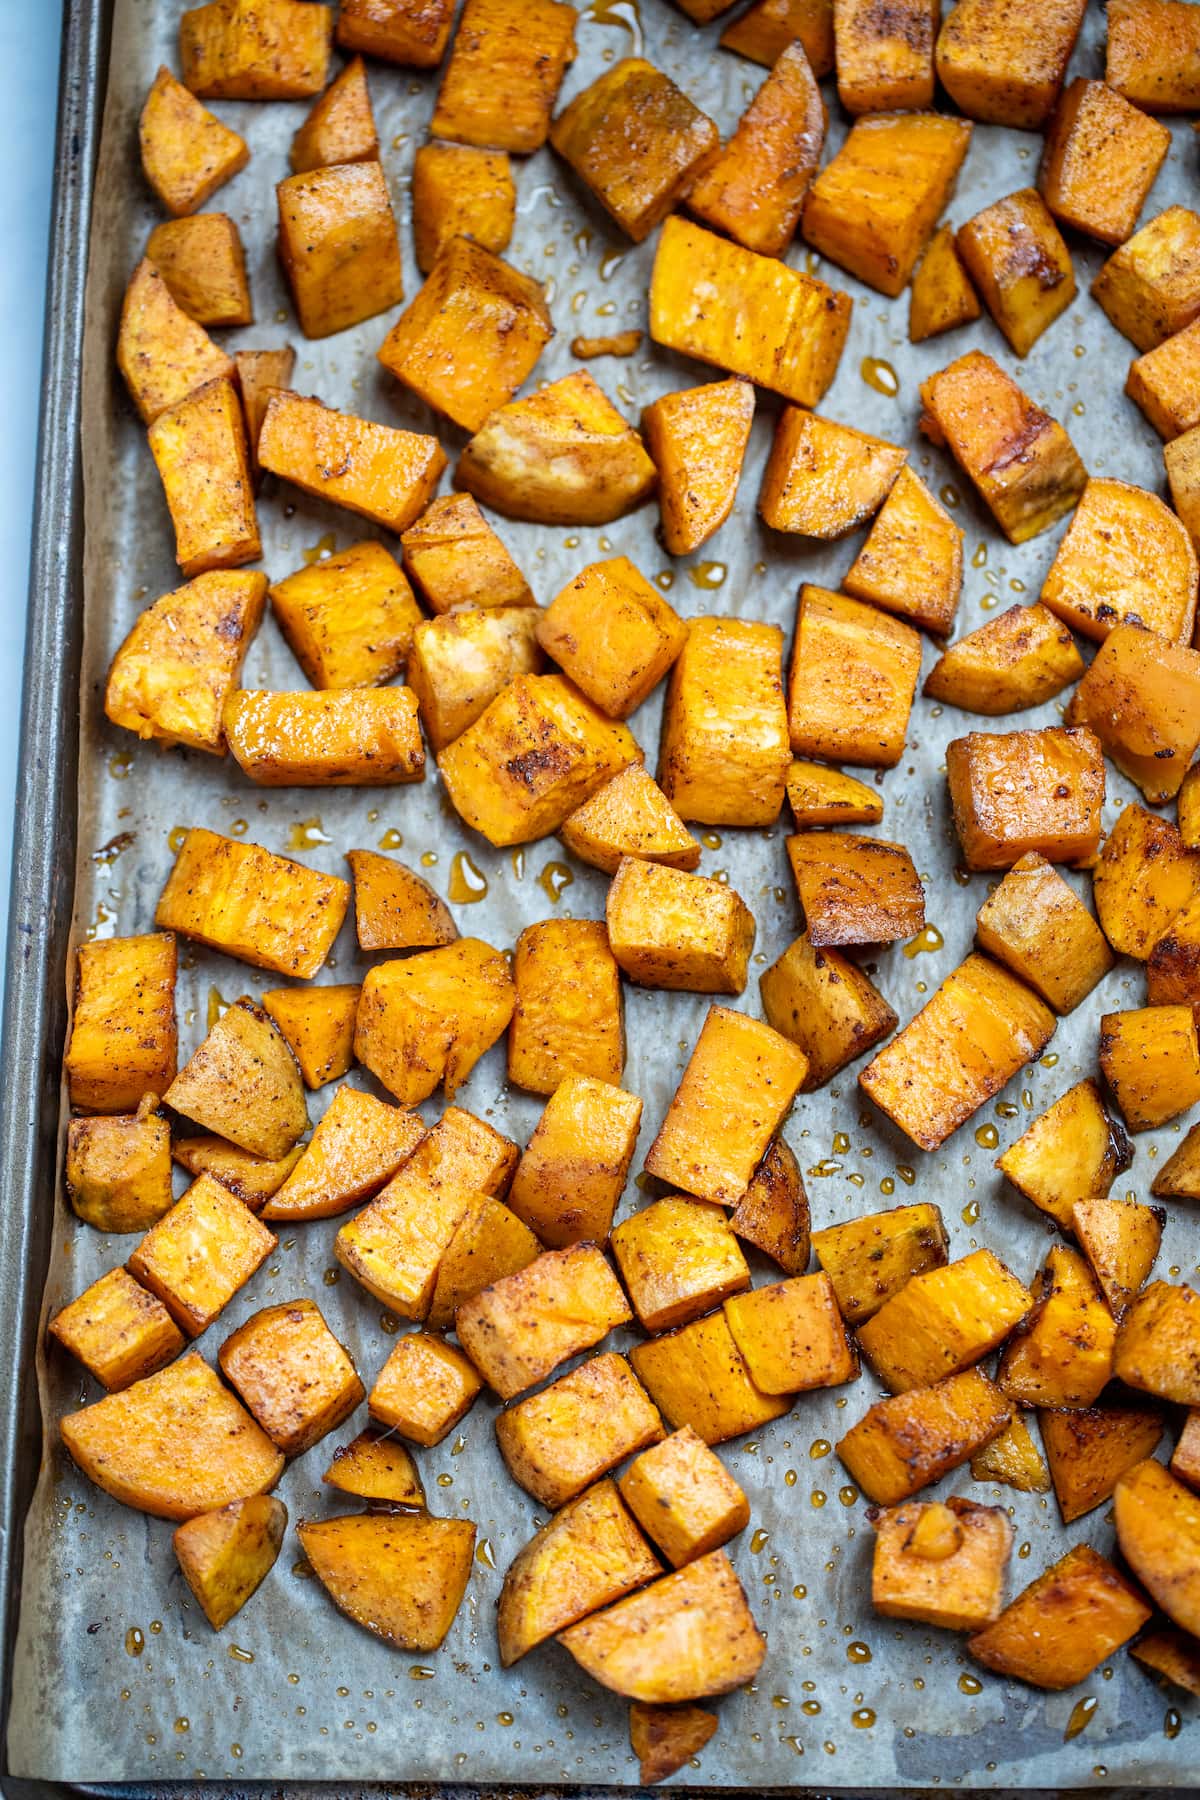 Roasted sweet potato cubes on a sheet pan with parchment paper.